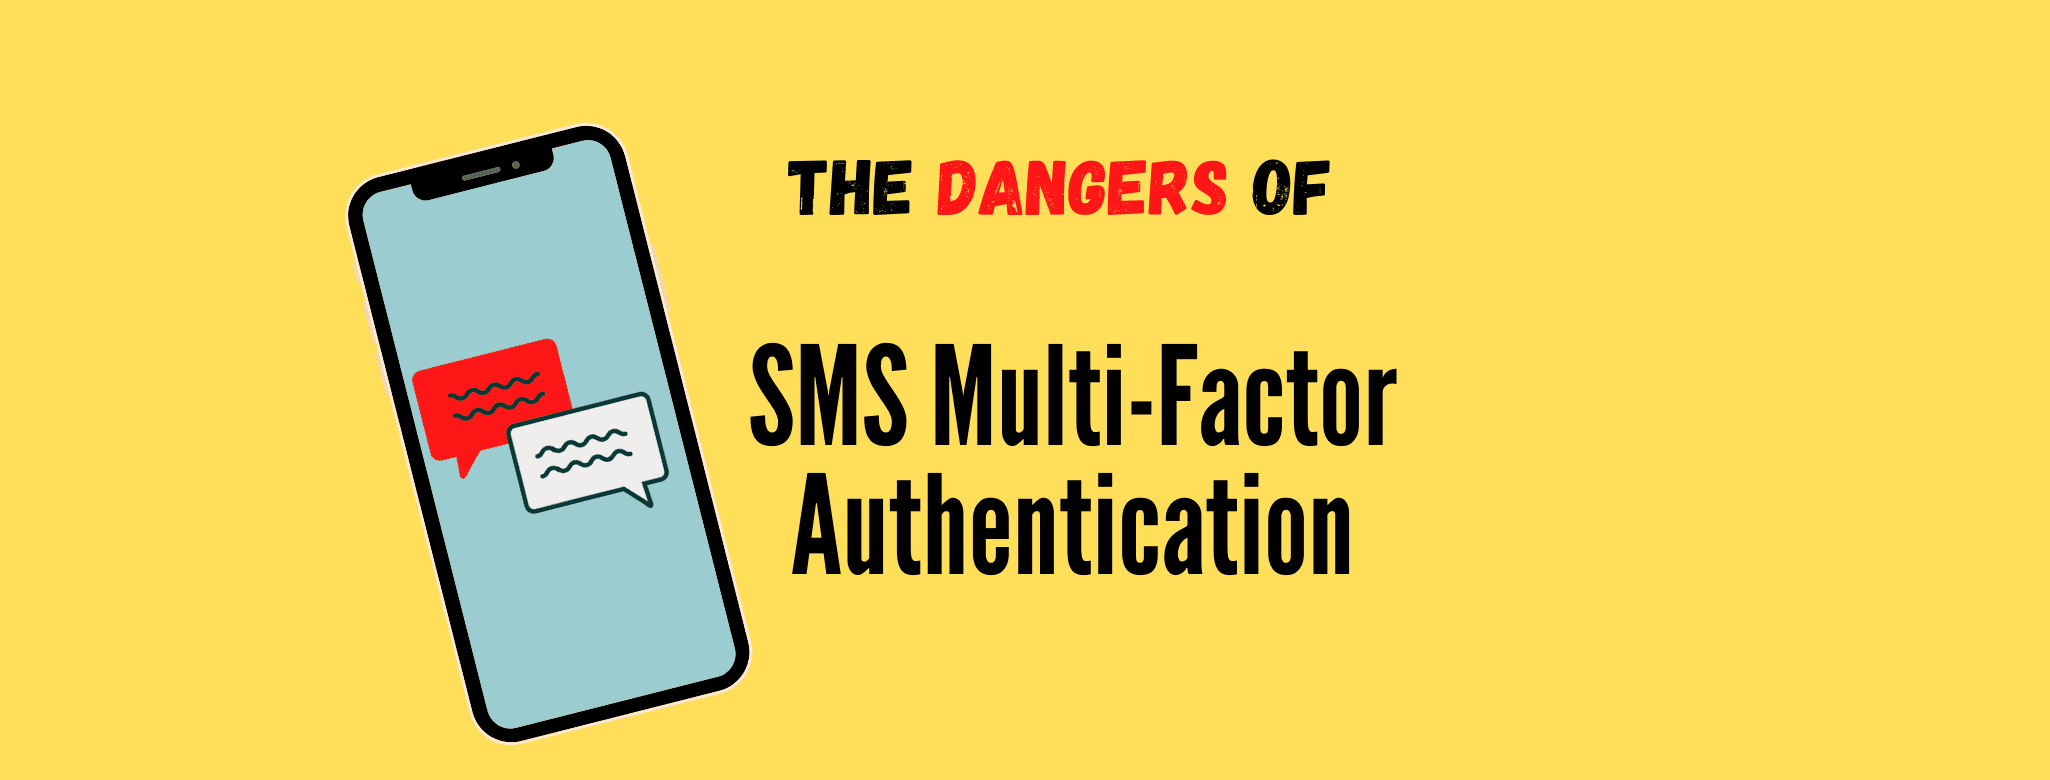 The Dangers of SMS Multi-Factor Authentication